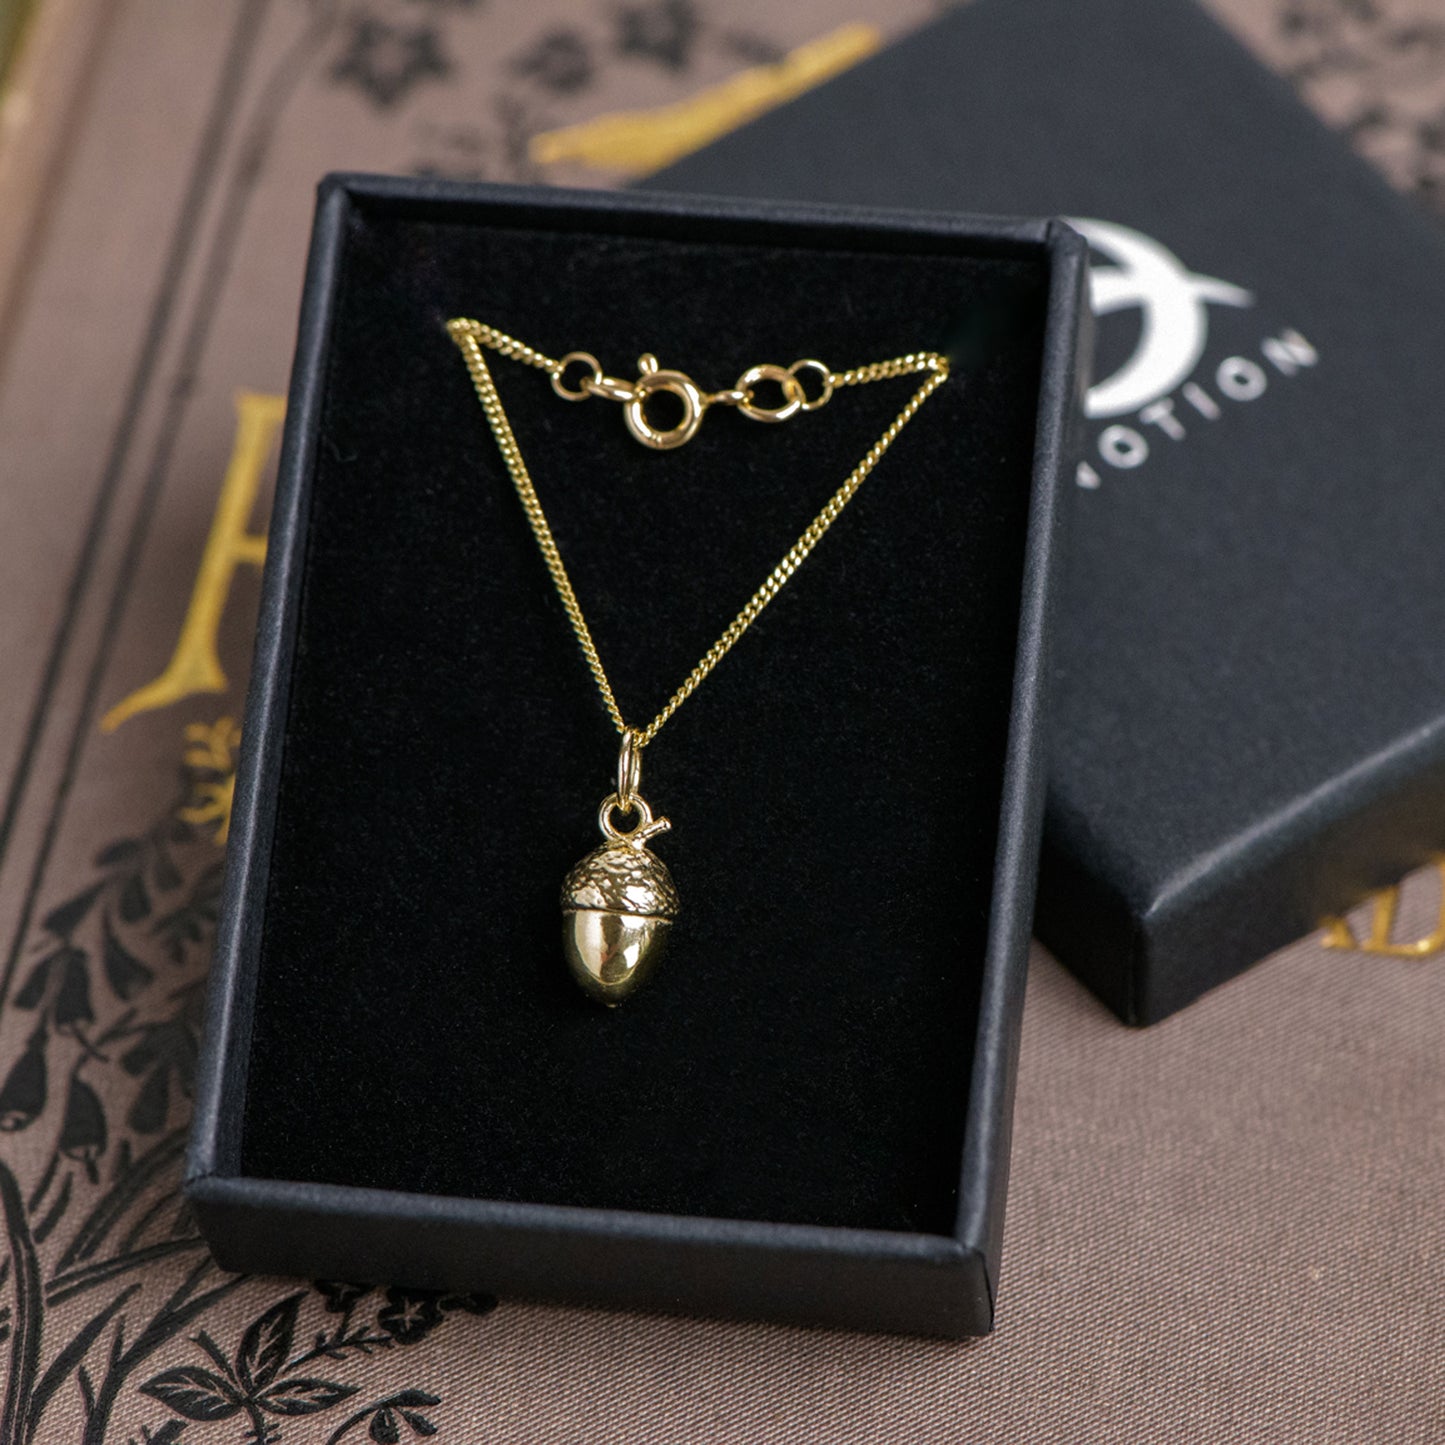 9ct gold acorn necklace in display box by Notion Jewellery 